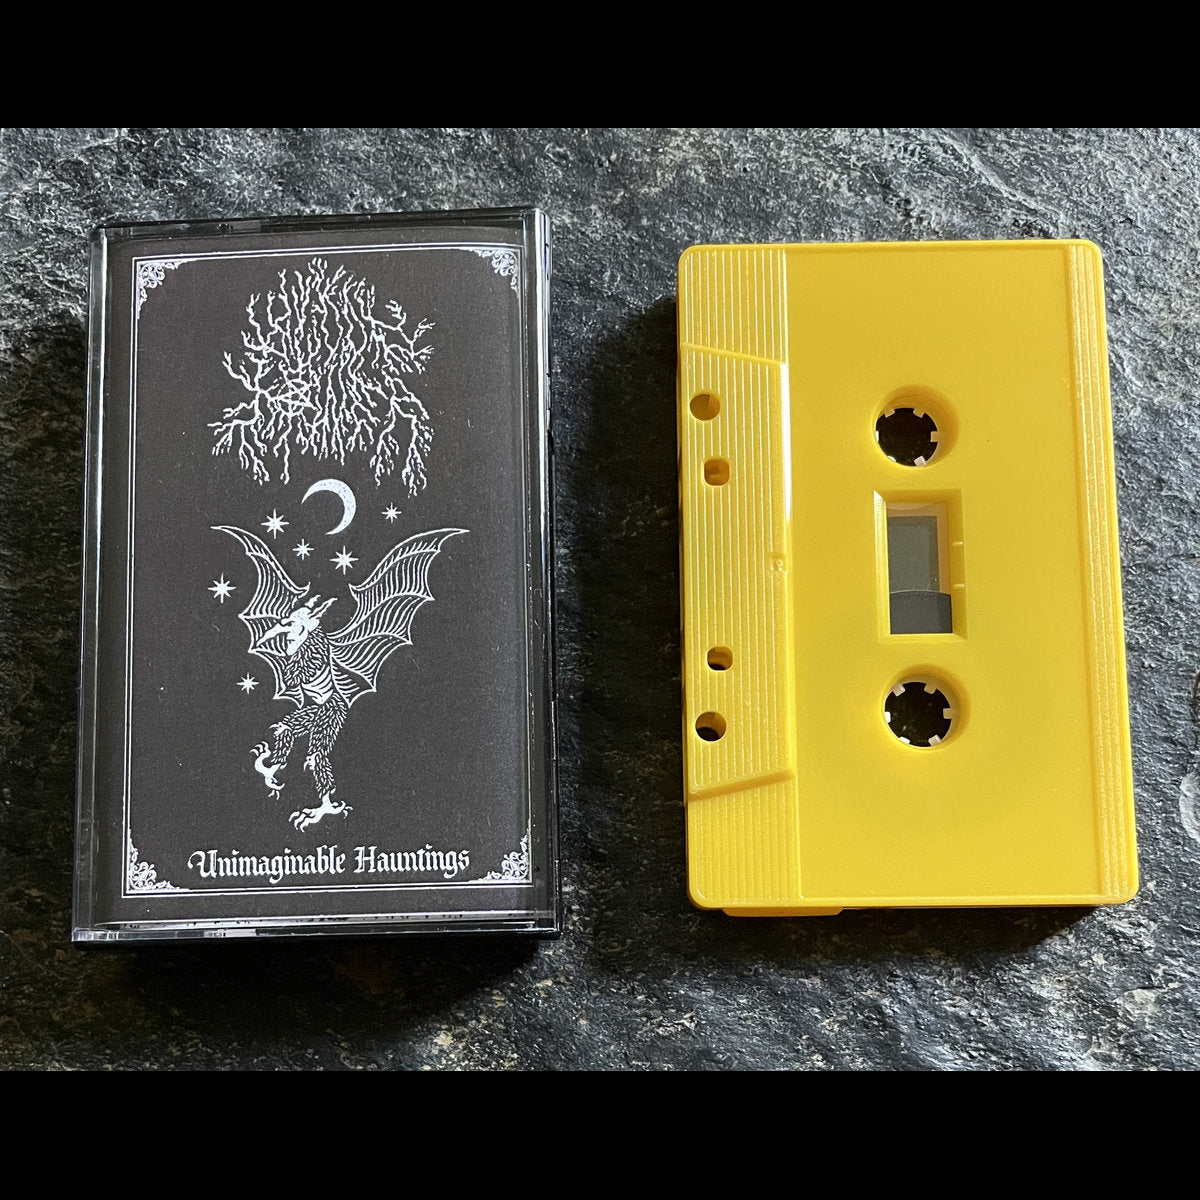 [SOLD OUT] BLOOD TOWER "Unimaginable Hauntings" cassette tape (lim.100)